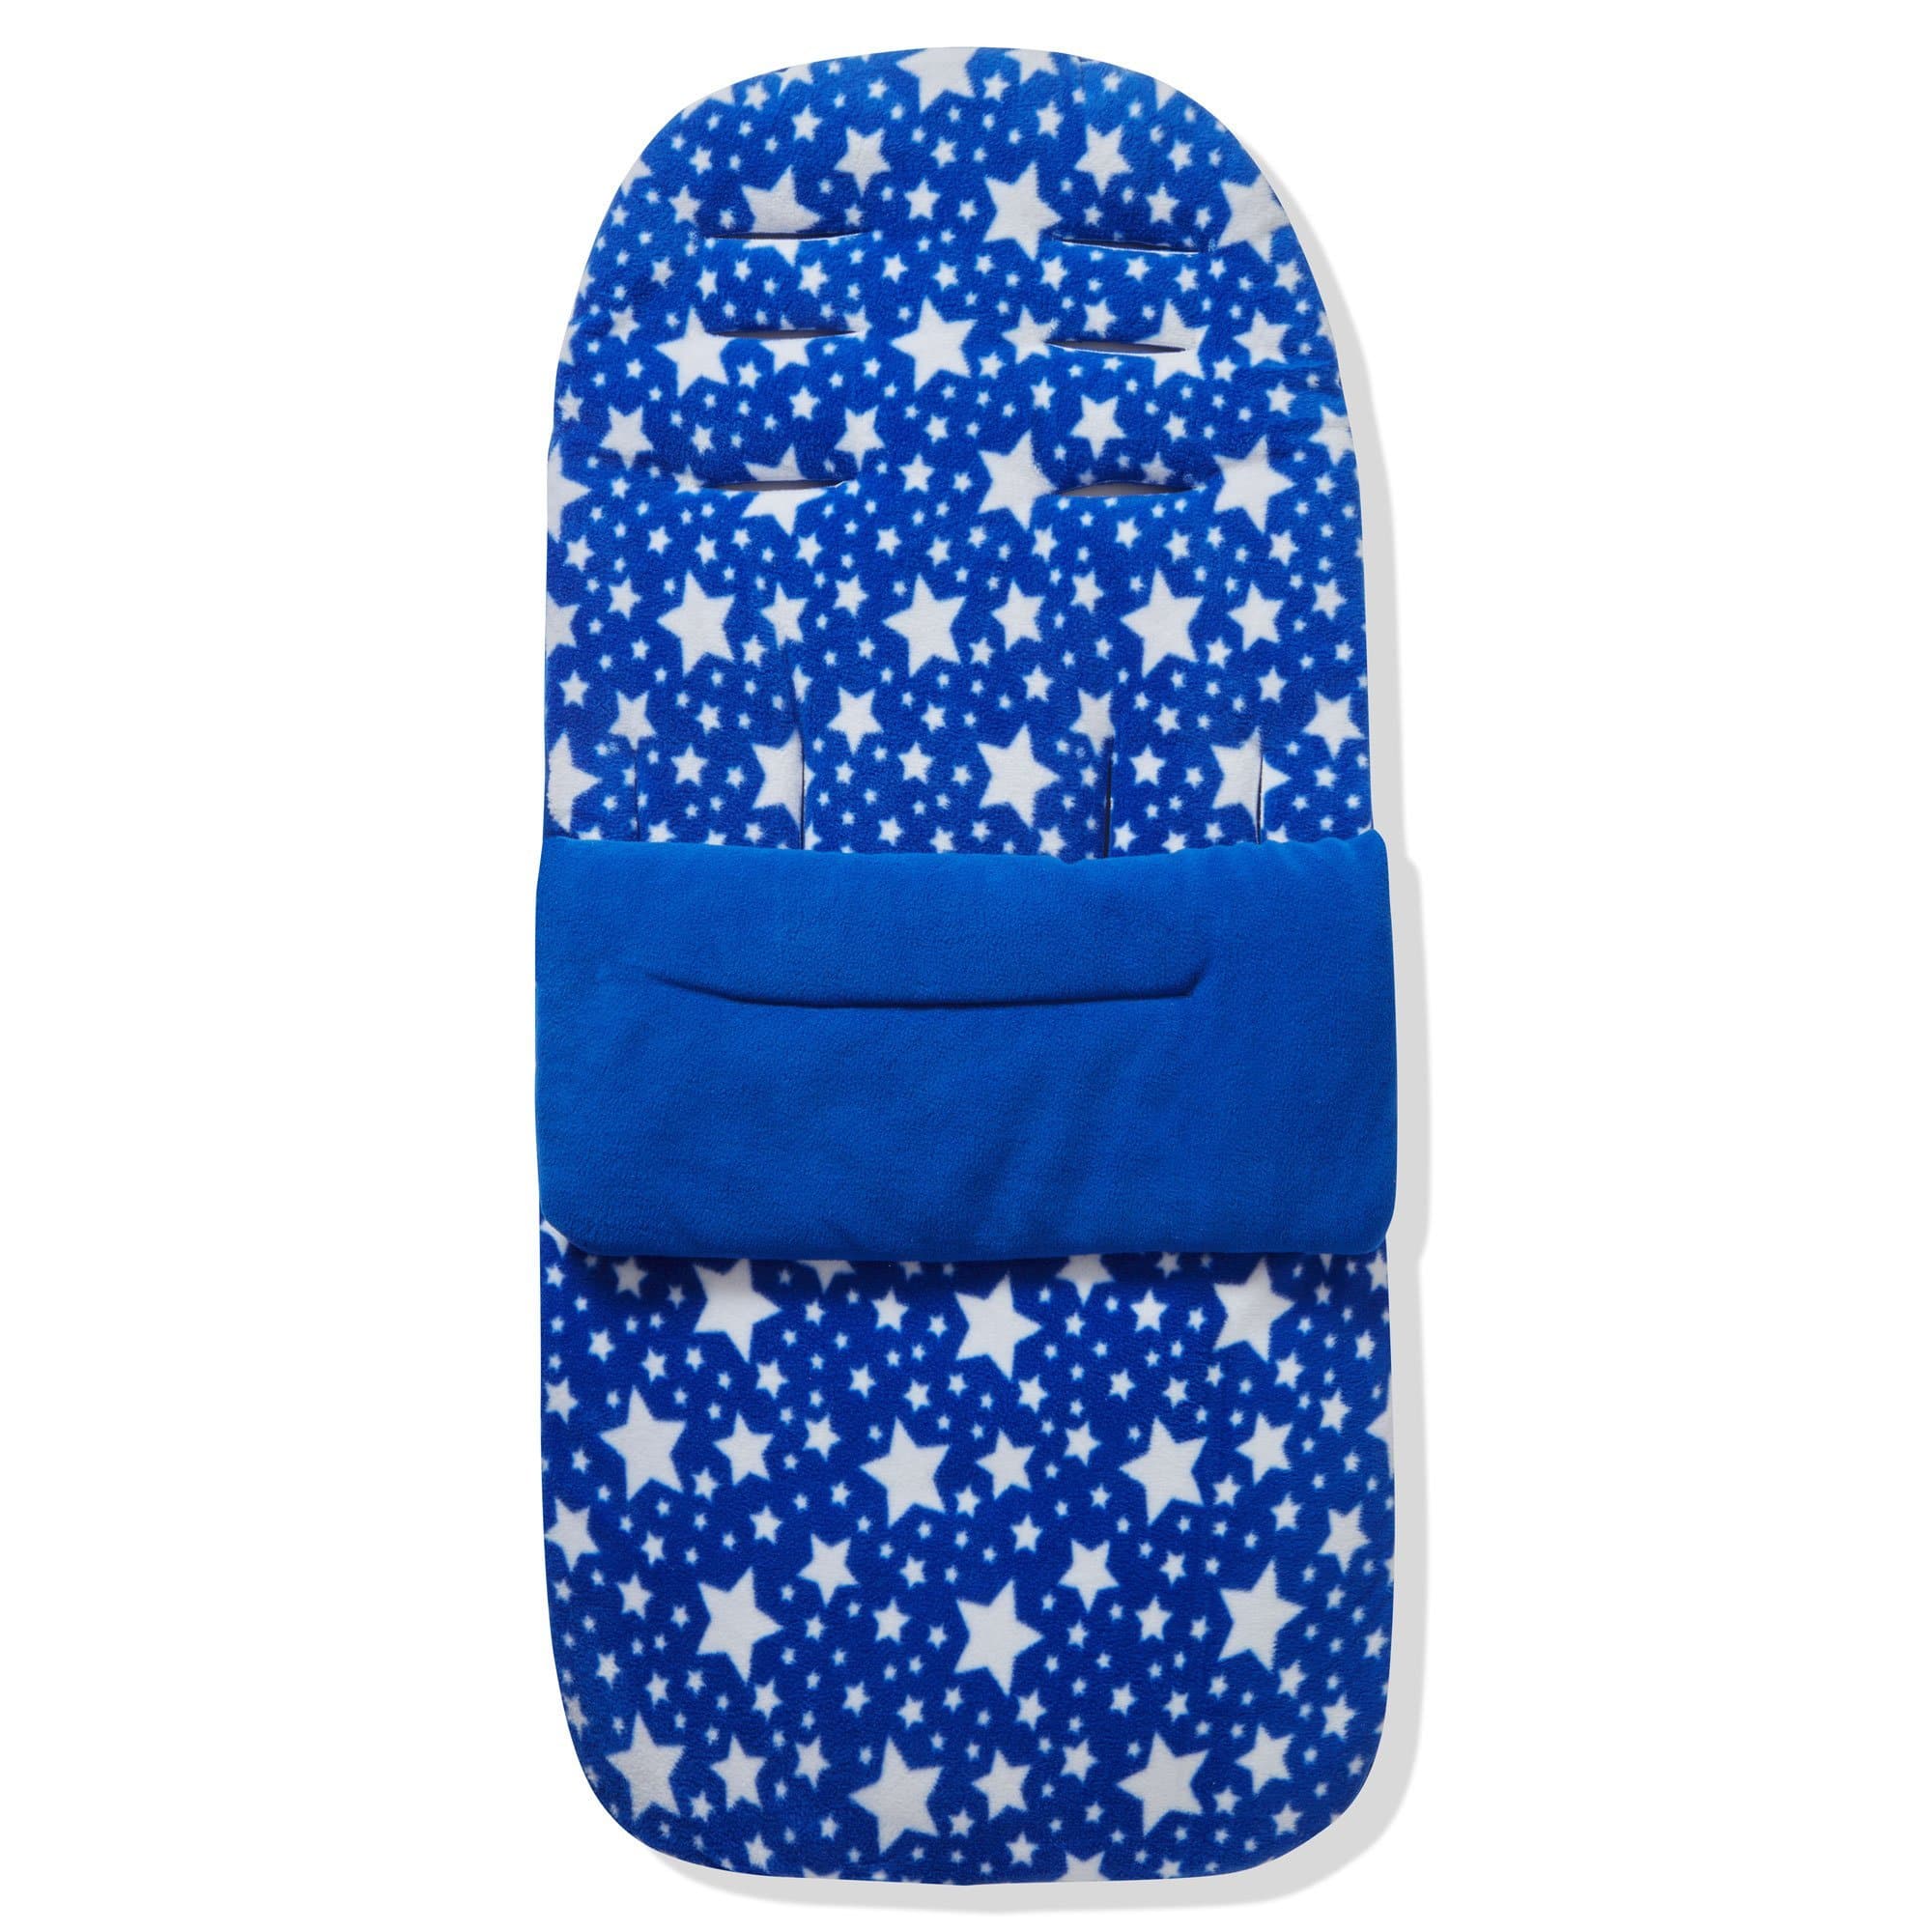 Fleece Footmuff / Cosy Toes Compatible with My Babiie - Blue Star / Fits All Models | For Your Little One